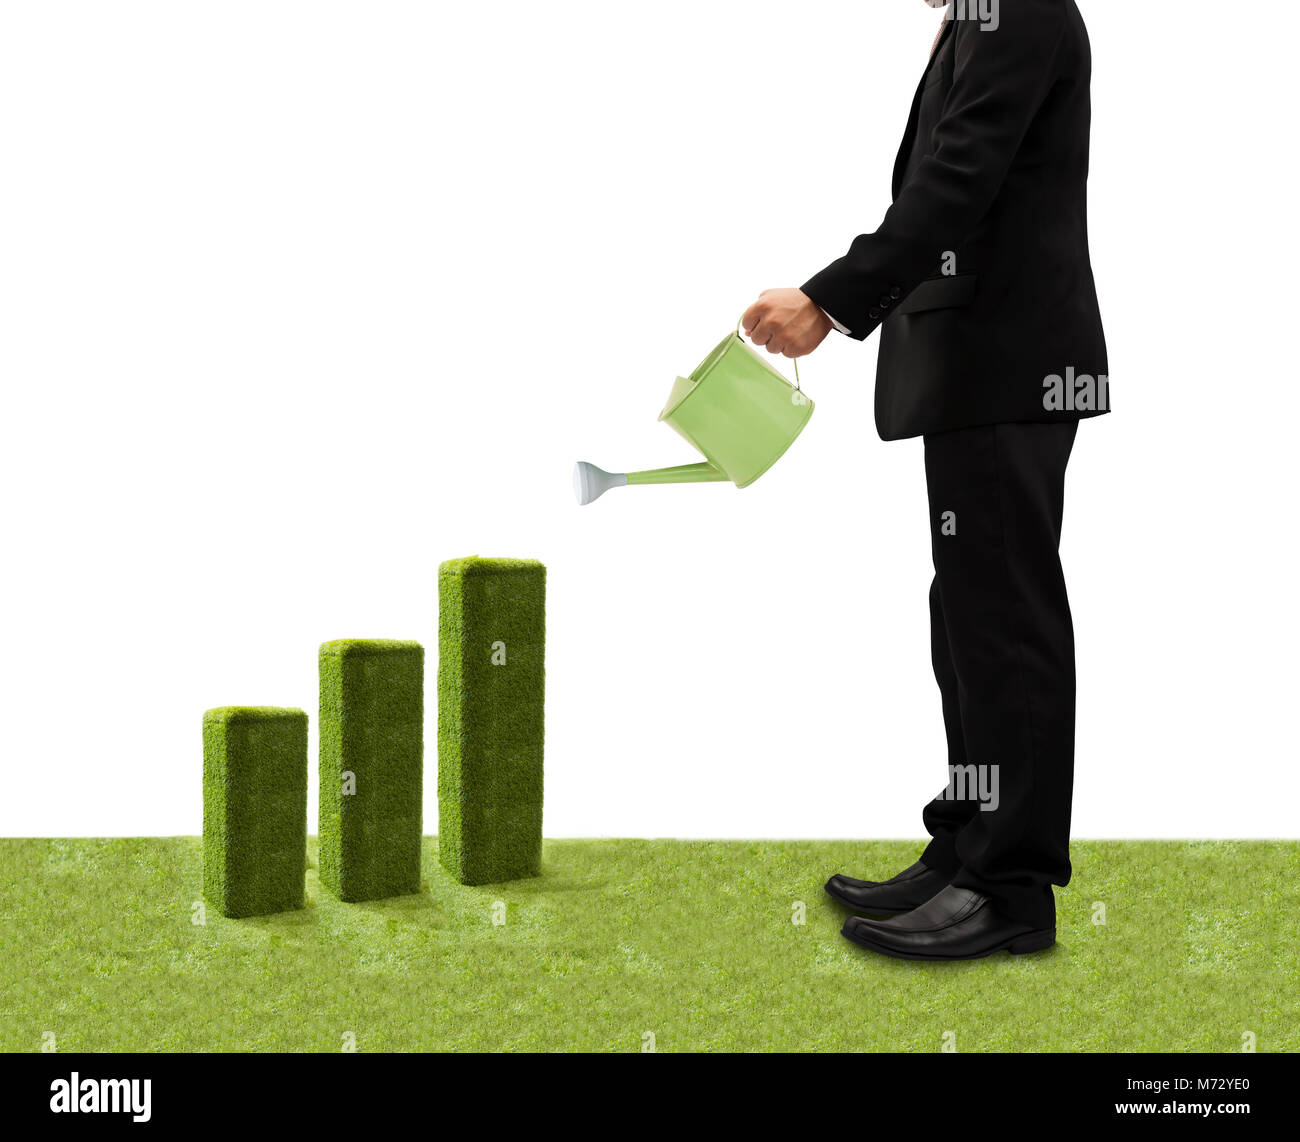 Investment concept, Investor earnings expectation. Stock Photo